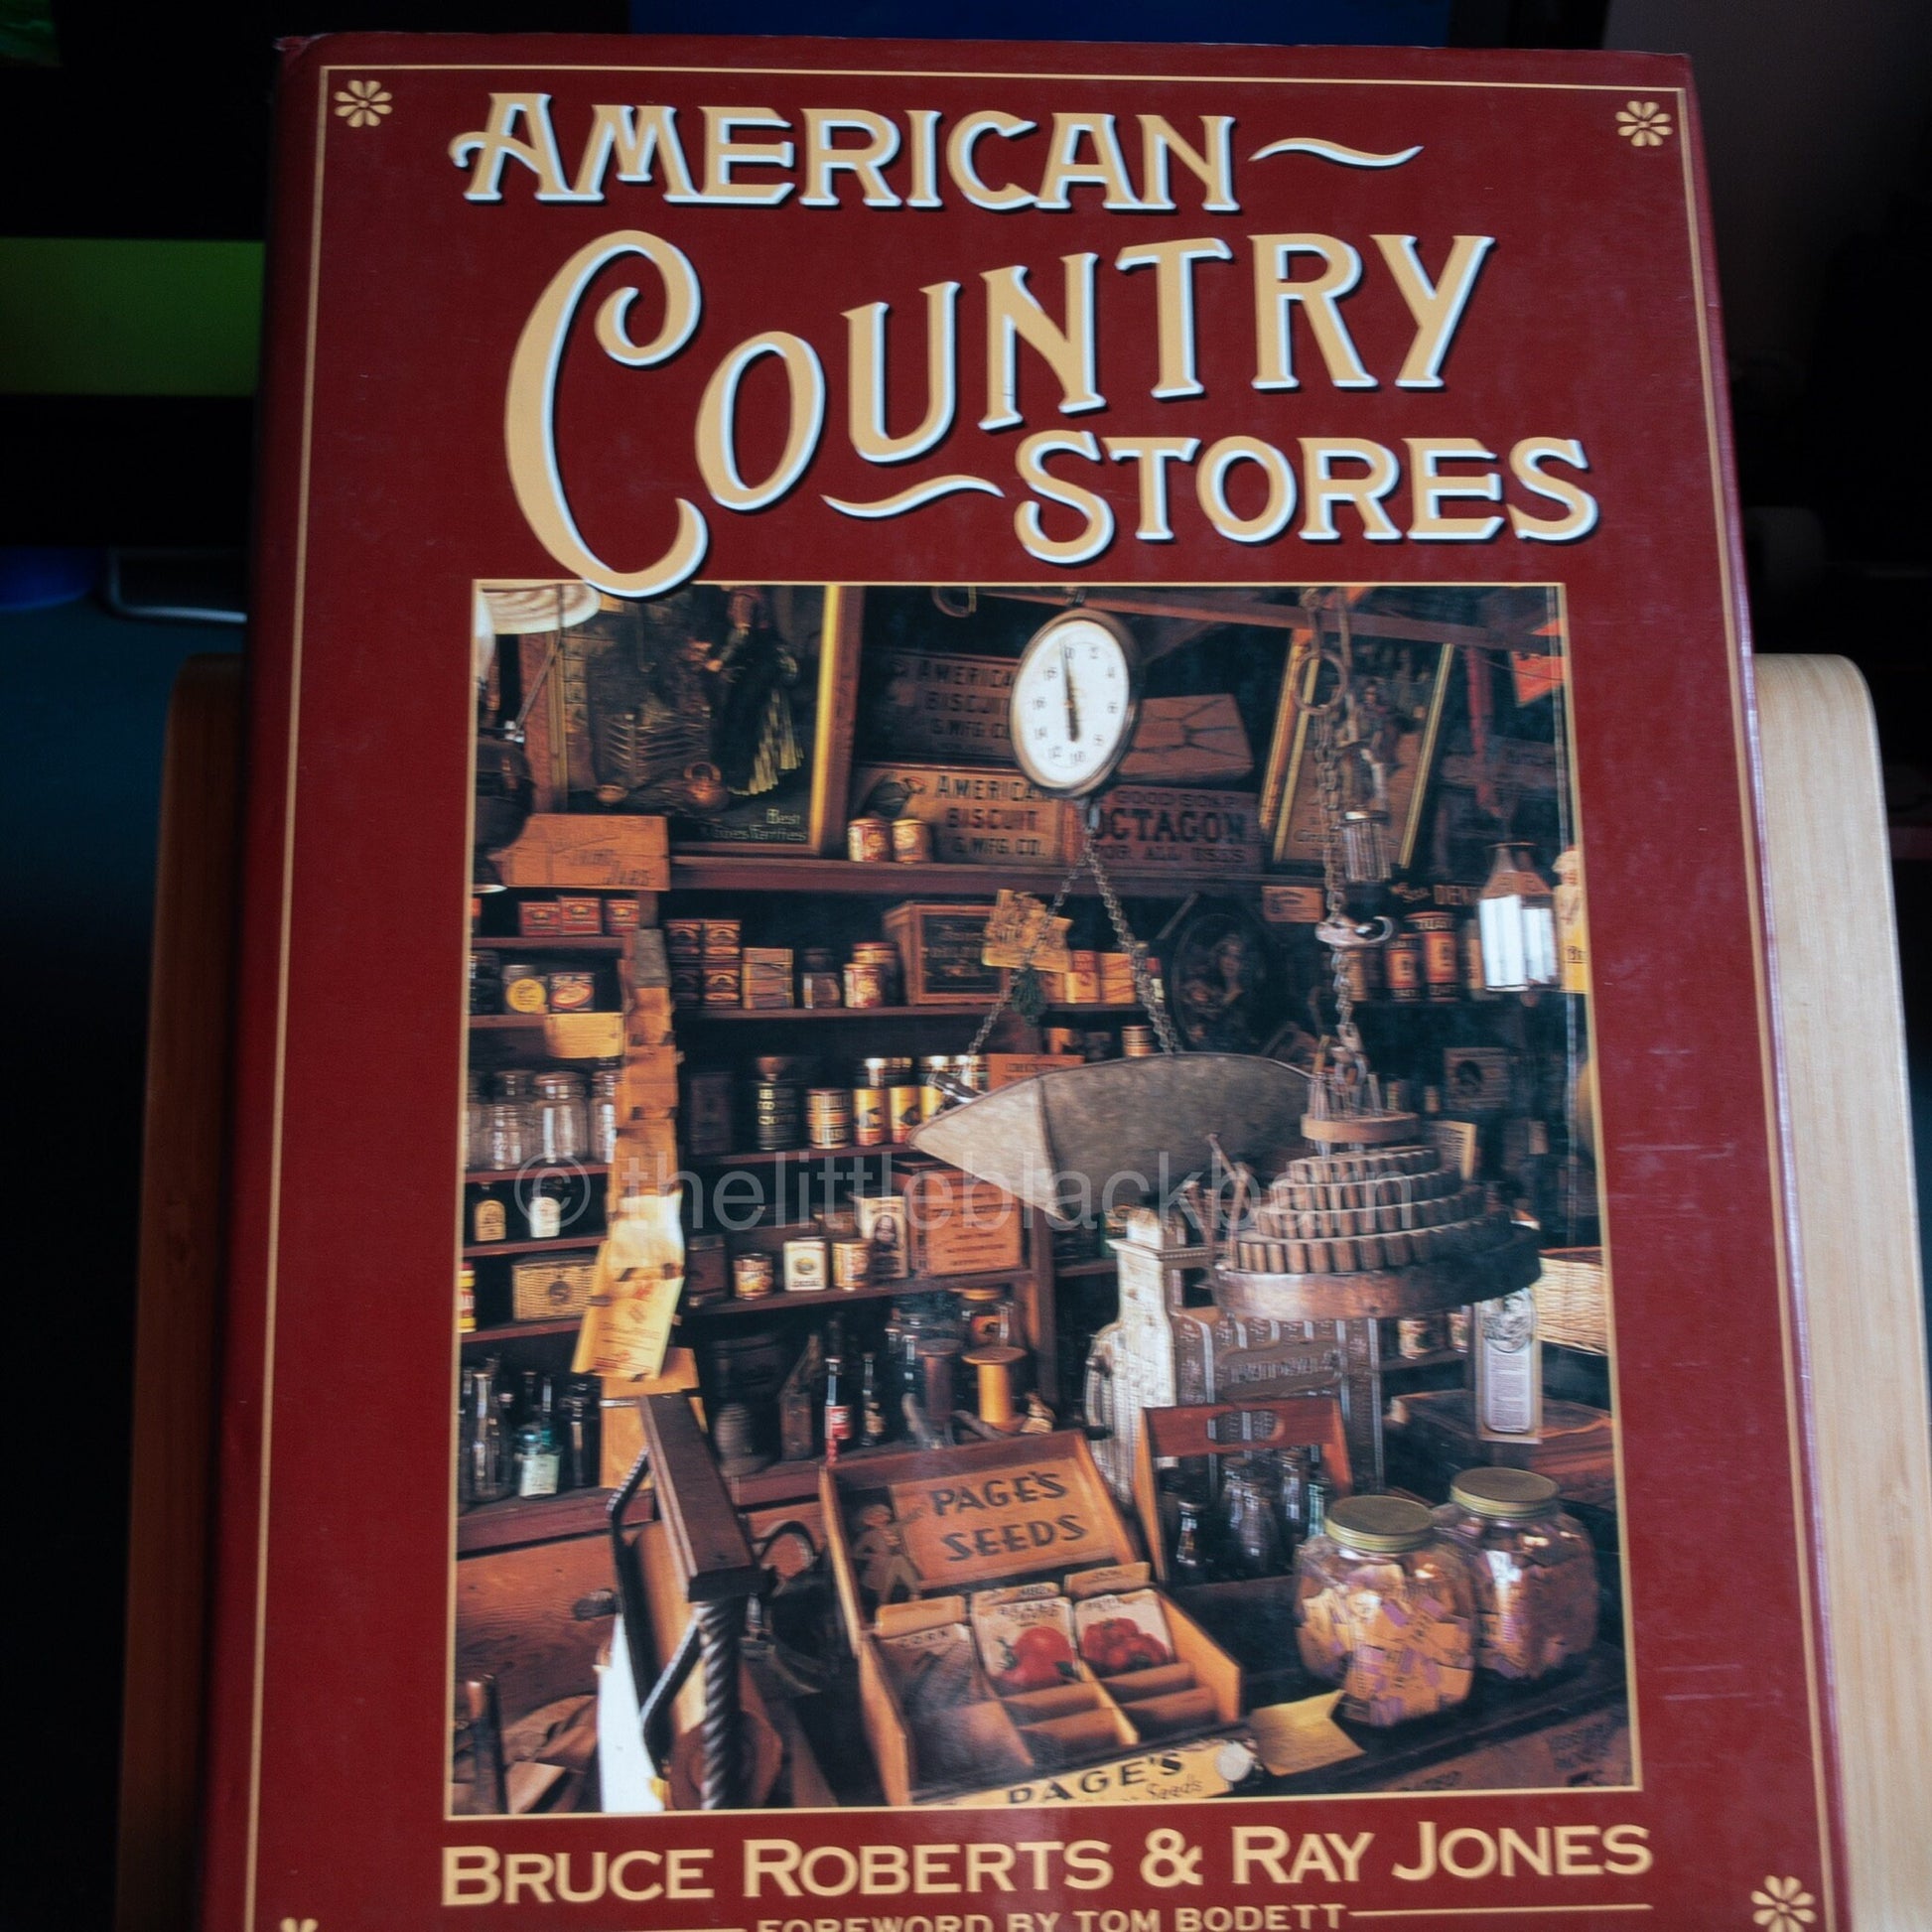 American Country Stores by Bruce Roberts & Ray Jones, Vintage 1991, Hardcover Book